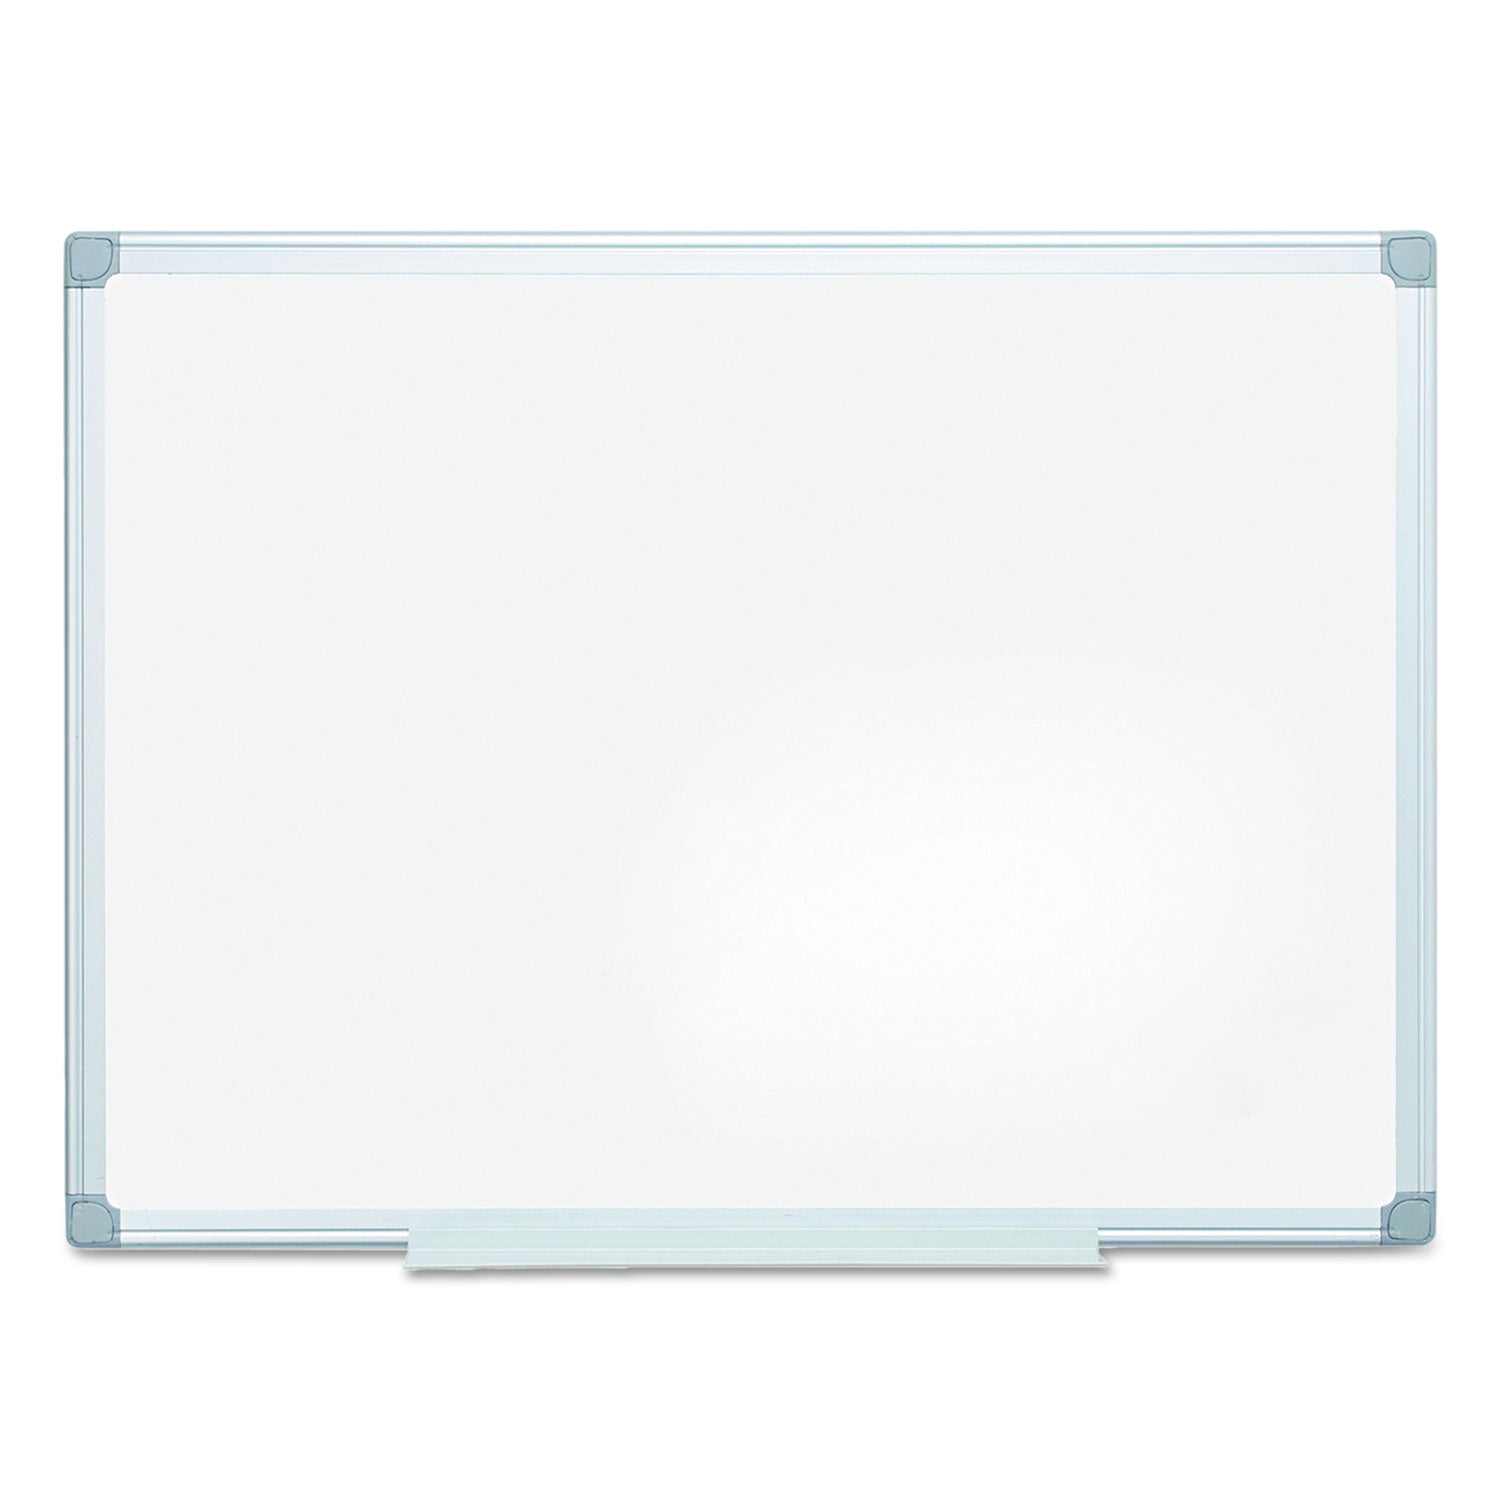 Earth Silver Easy-Clean Dry Erase Board, Reversible, 48 x 36, White Surface, Silver Aluminum Frame - 